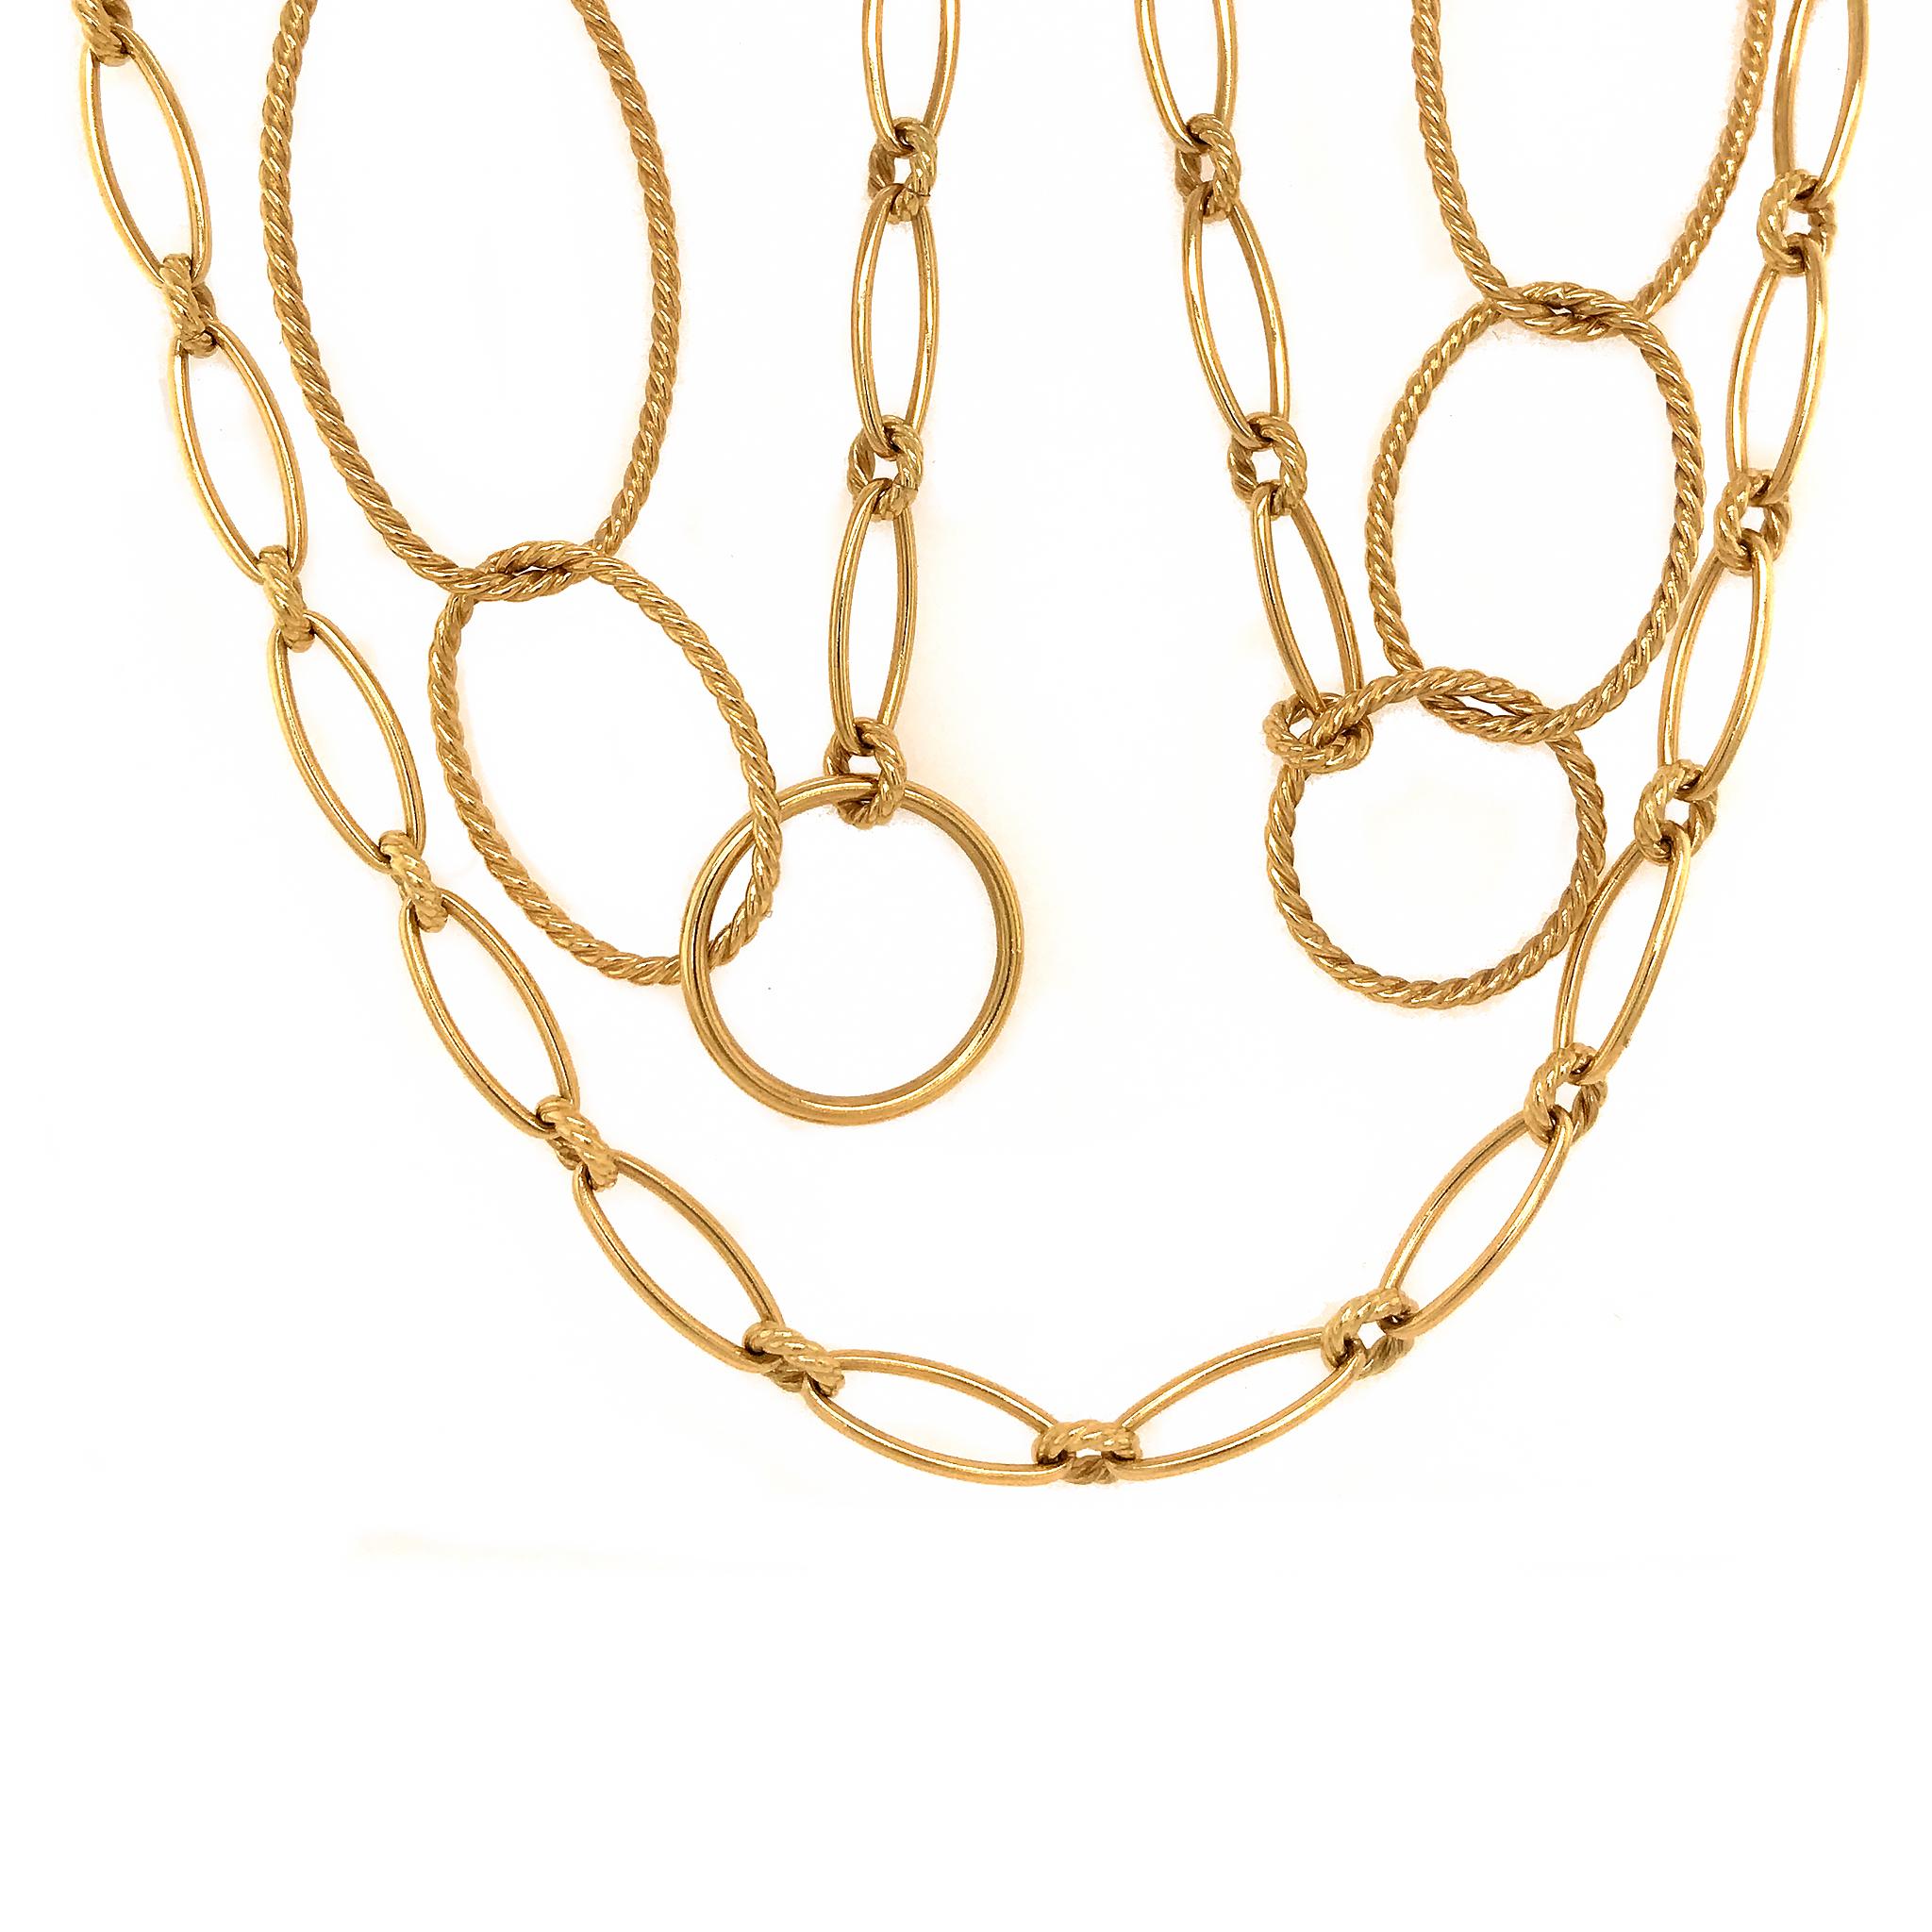 chain link necklace types